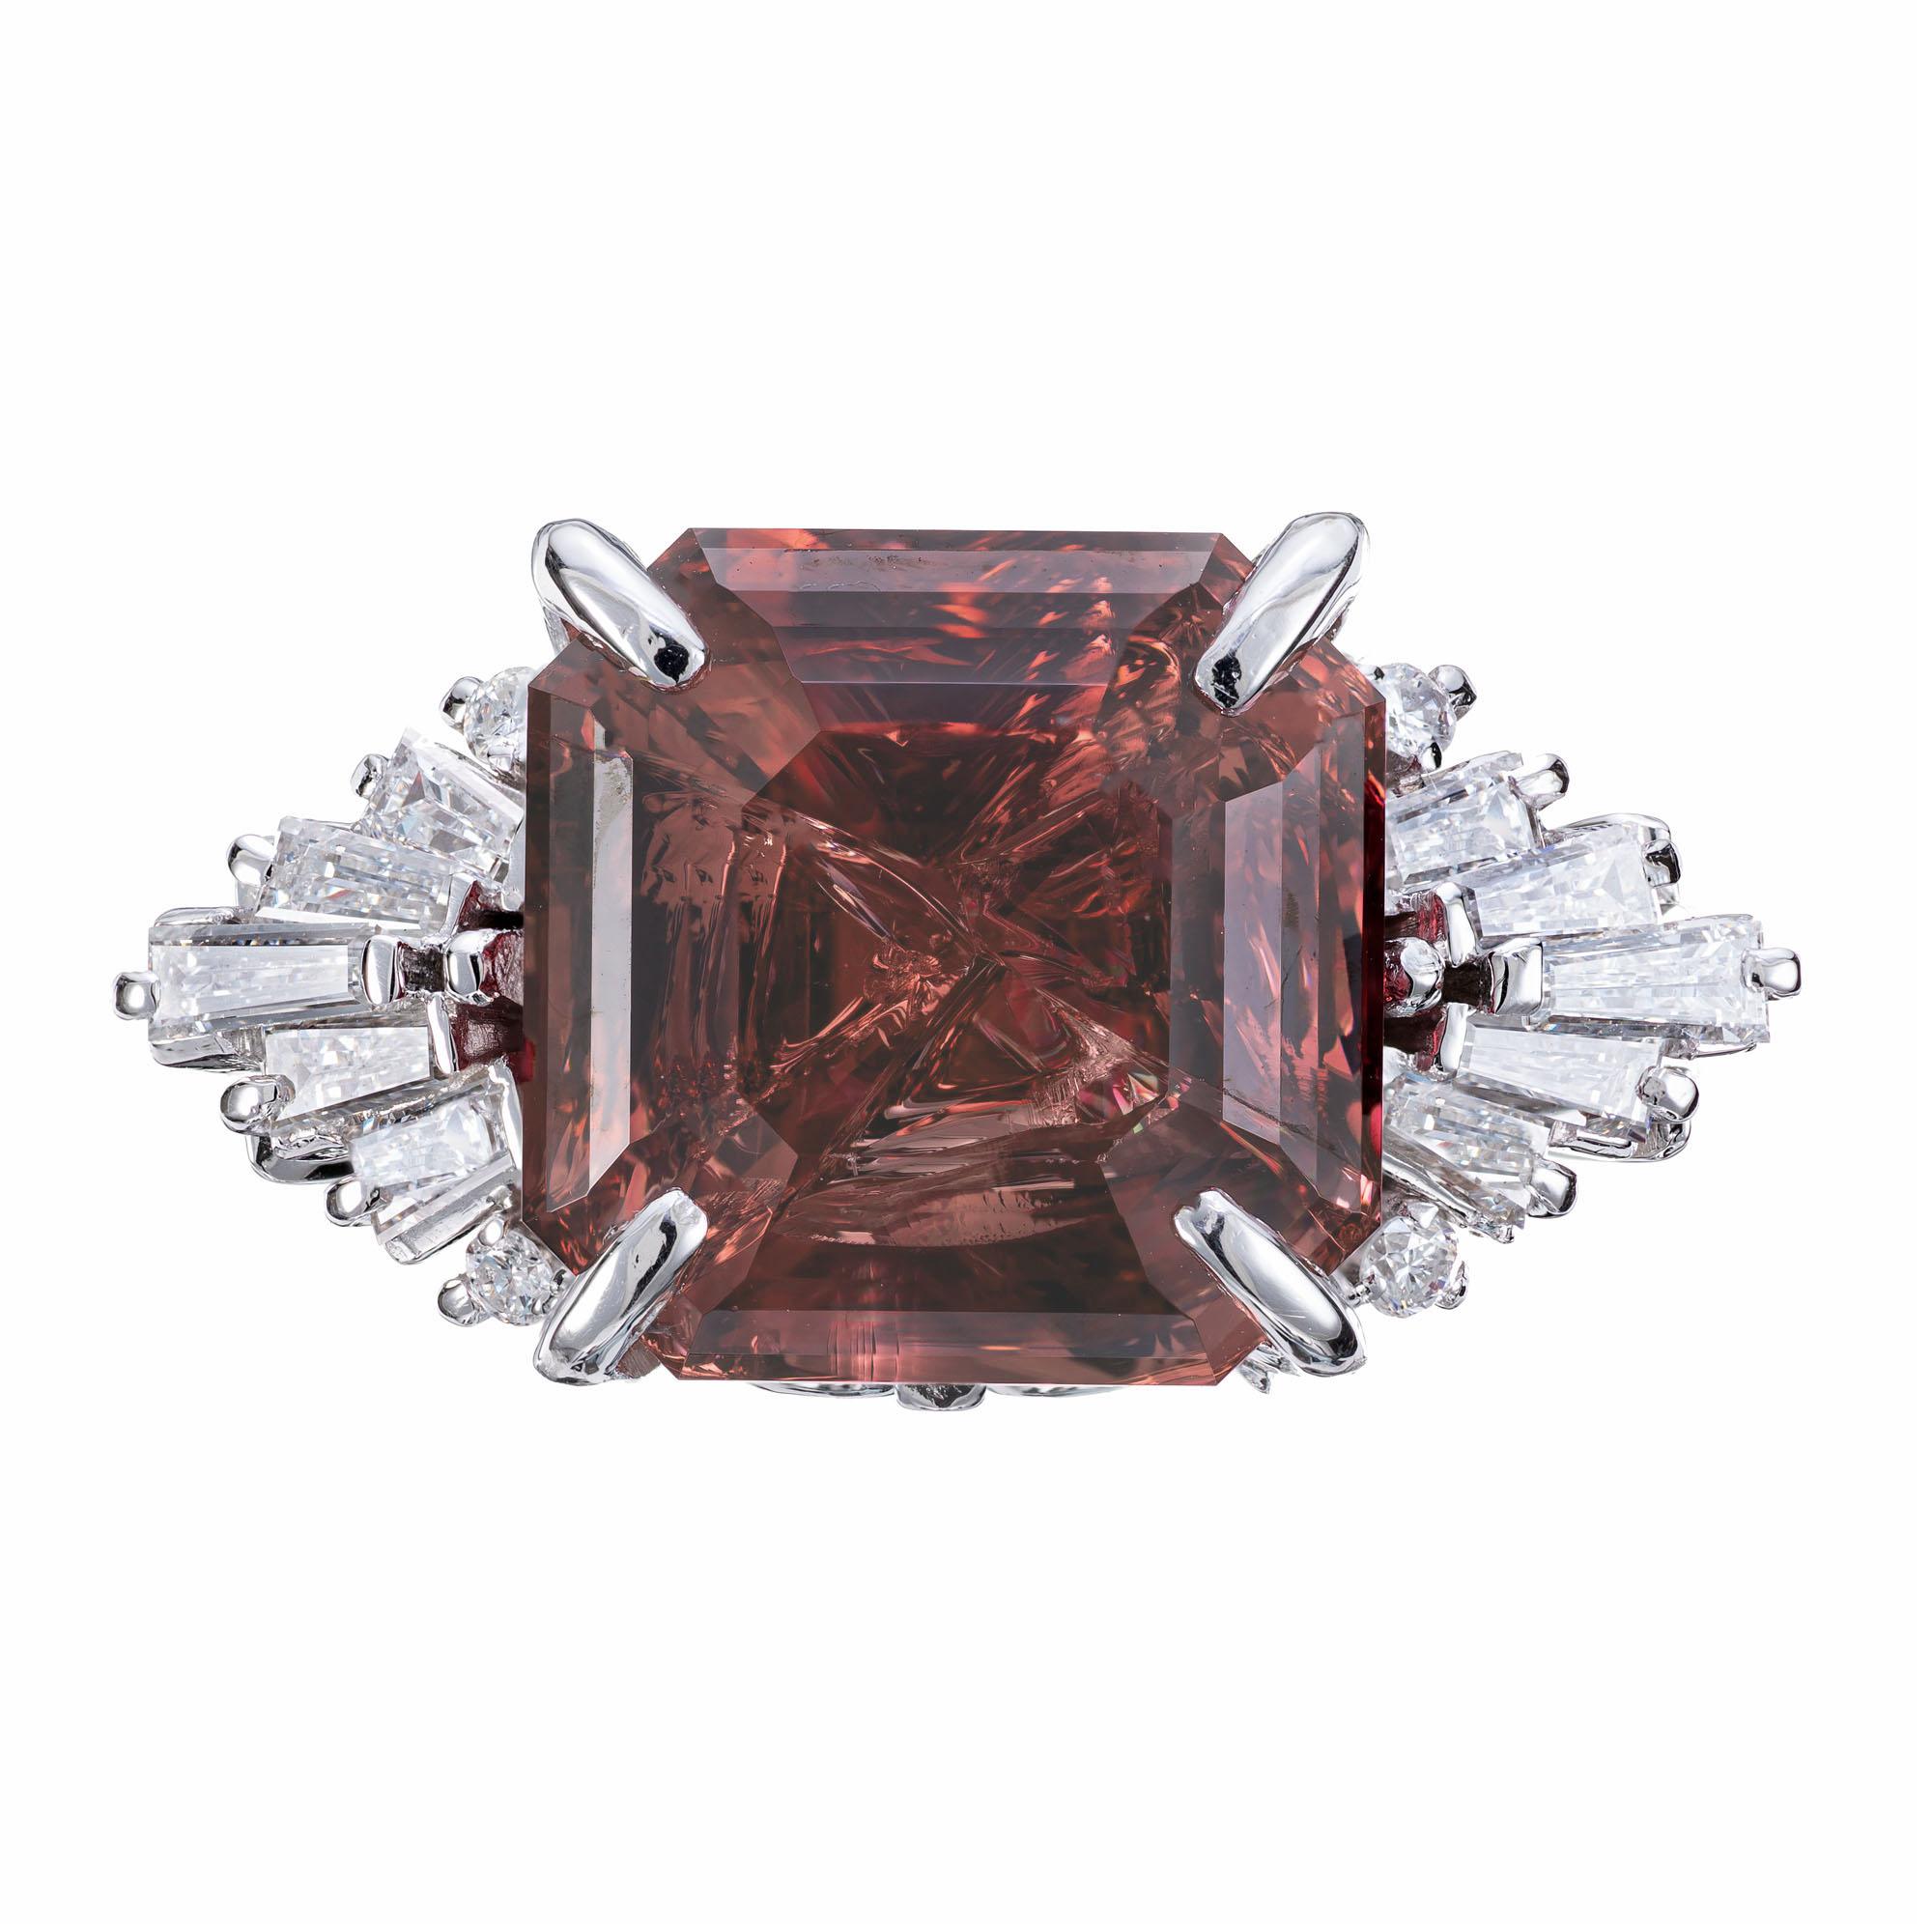 Garnet and diamond engagement ring. AGL certified 10.99ct brown orange/pink, natural Garnet center stone, set in a platinum setting with tapered baguette and round full cut accent diamonds. The garnet has elements of Pyrope Almandite and Spessartite